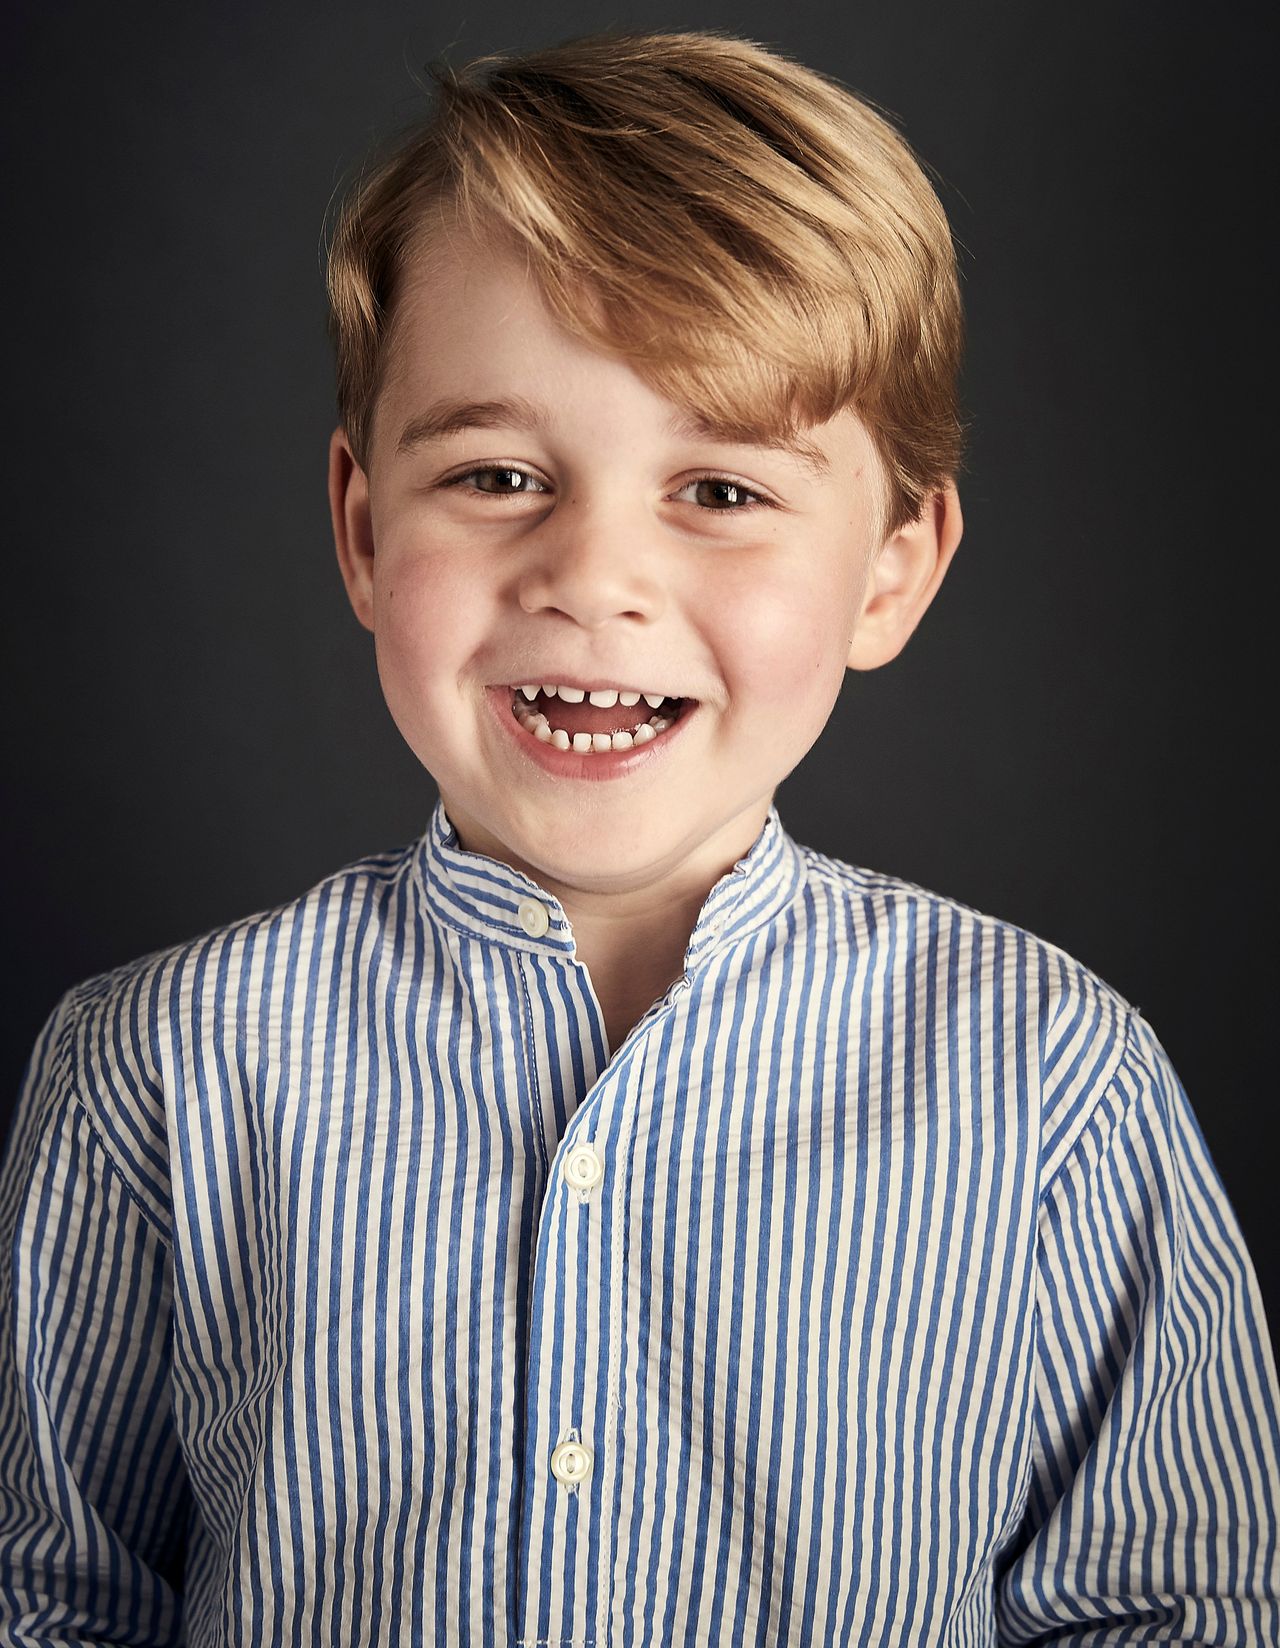 Chris Jackson was chosen by Kensington Palace to take Prince George's official portrait for his fourth birthday.